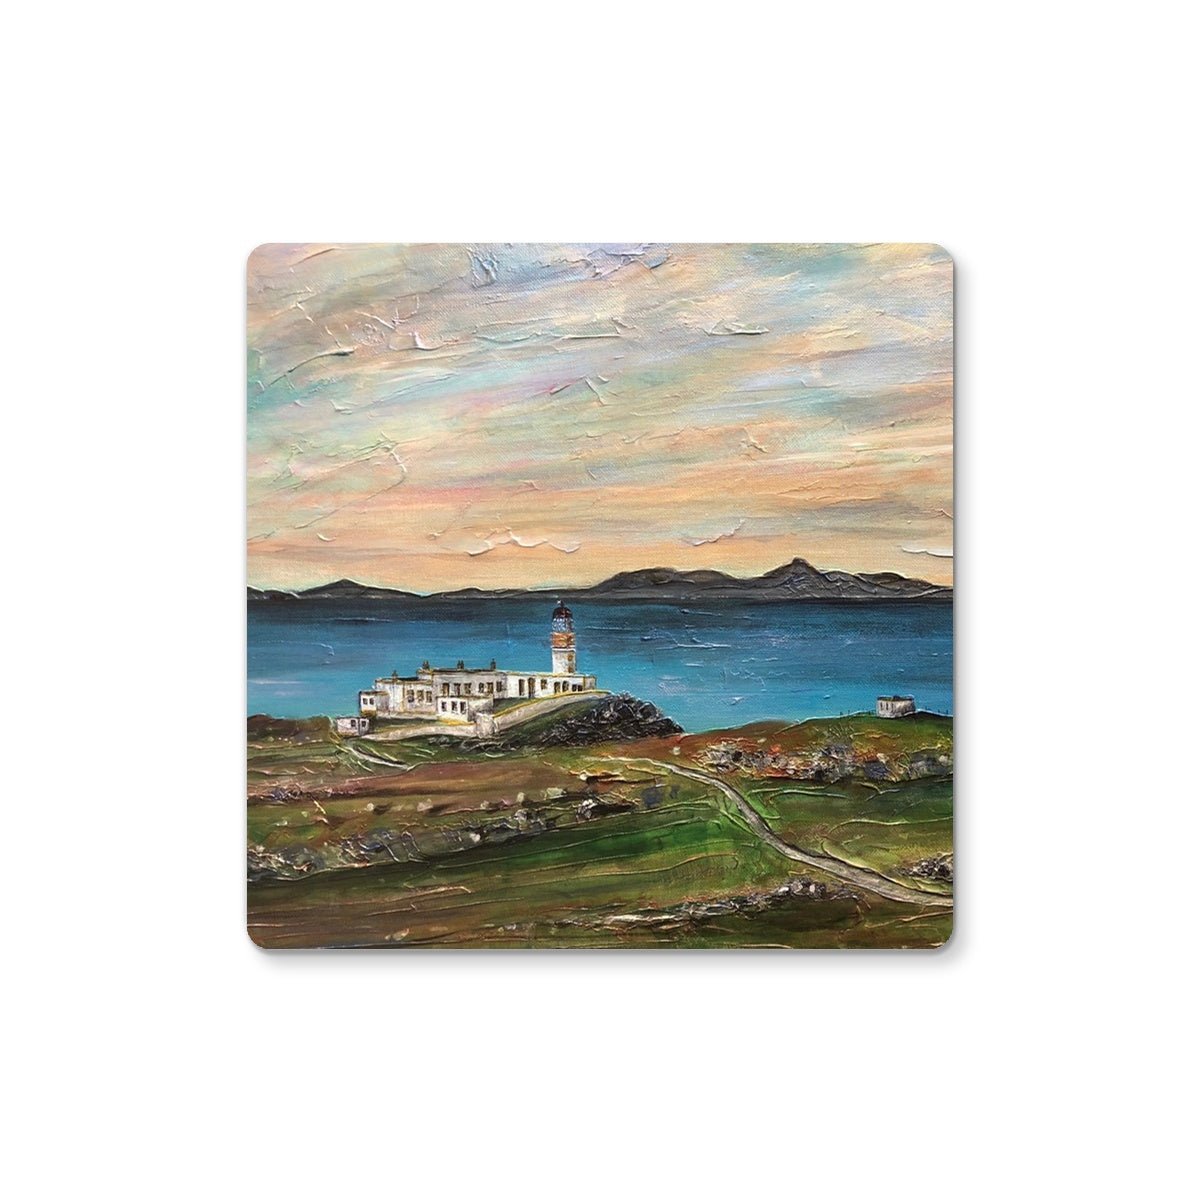 Neist Point Skye Art Gifts Coaster-Coasters-Skye Art Gallery-6 Coasters-Paintings, Prints, Homeware, Art Gifts From Scotland By Scottish Artist Kevin Hunter